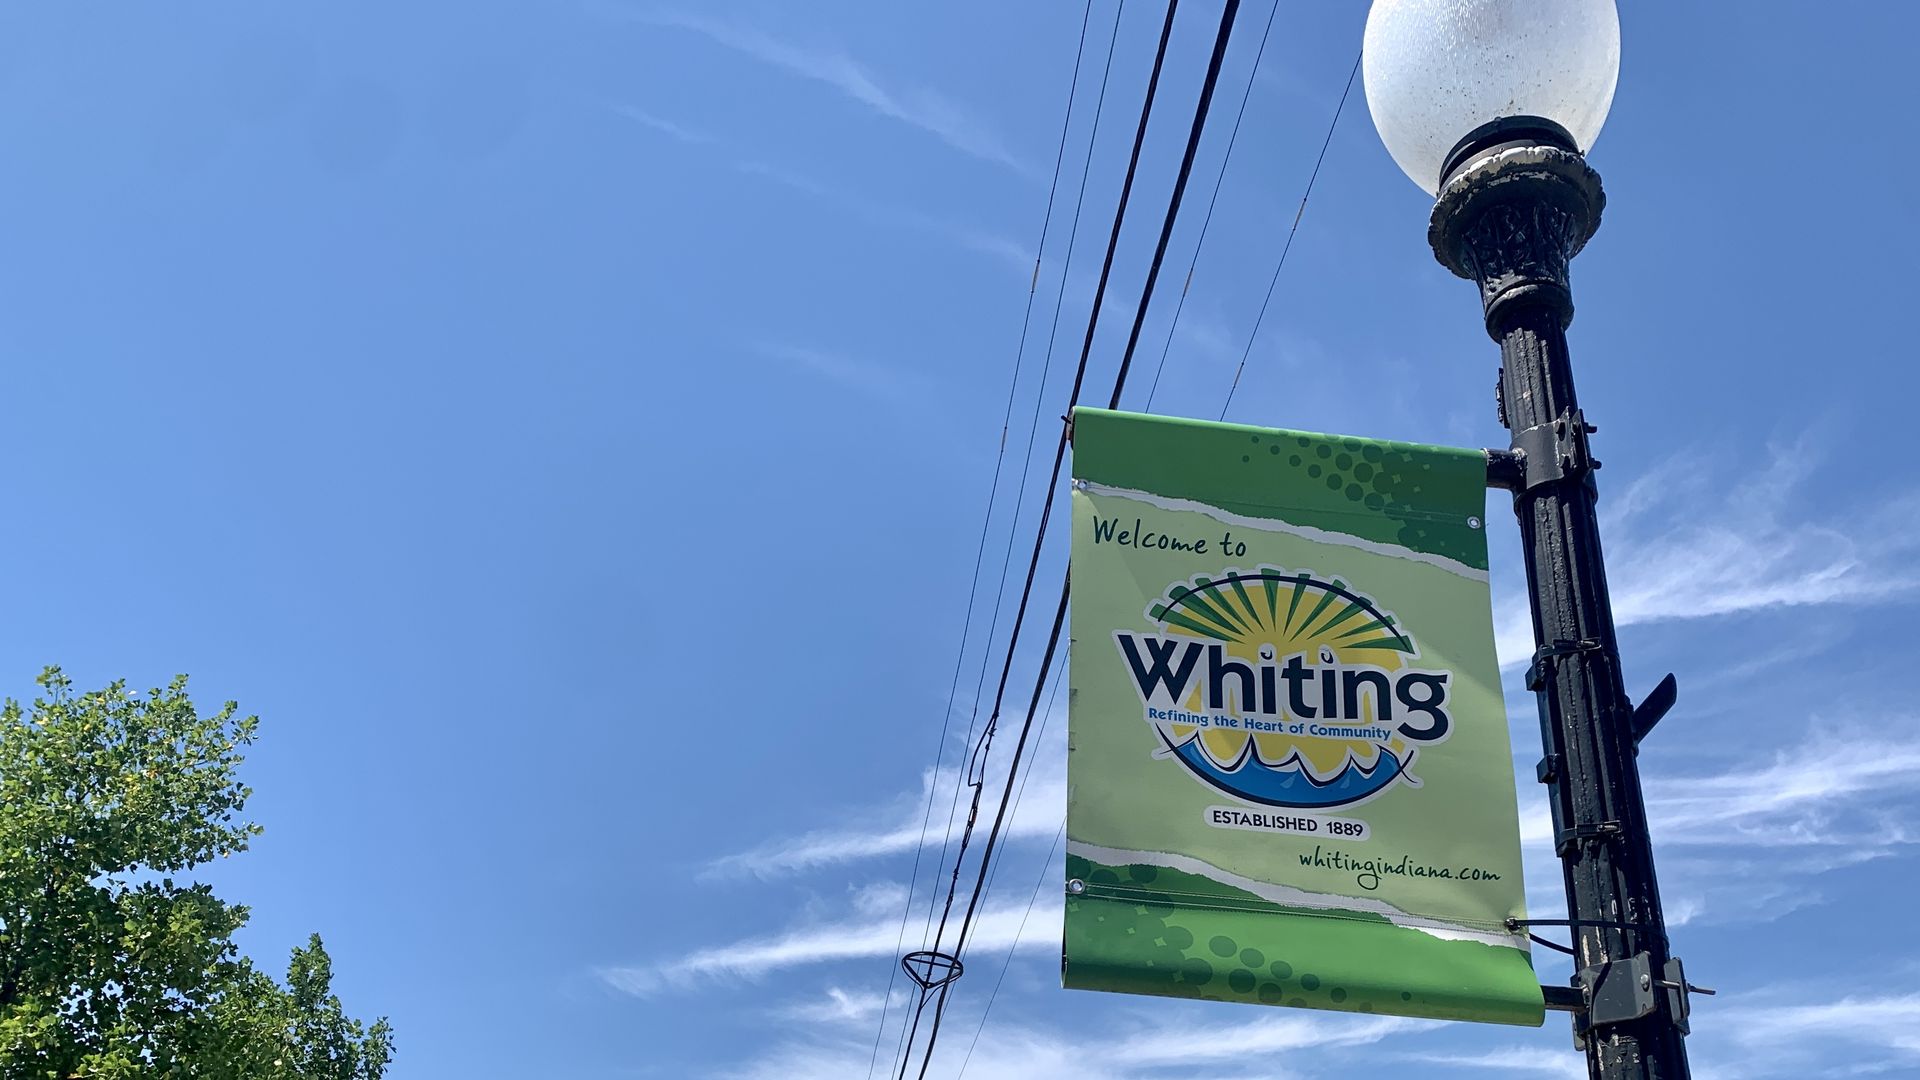 Black lightpost with green banner that reads "Welcome to Whiting" 